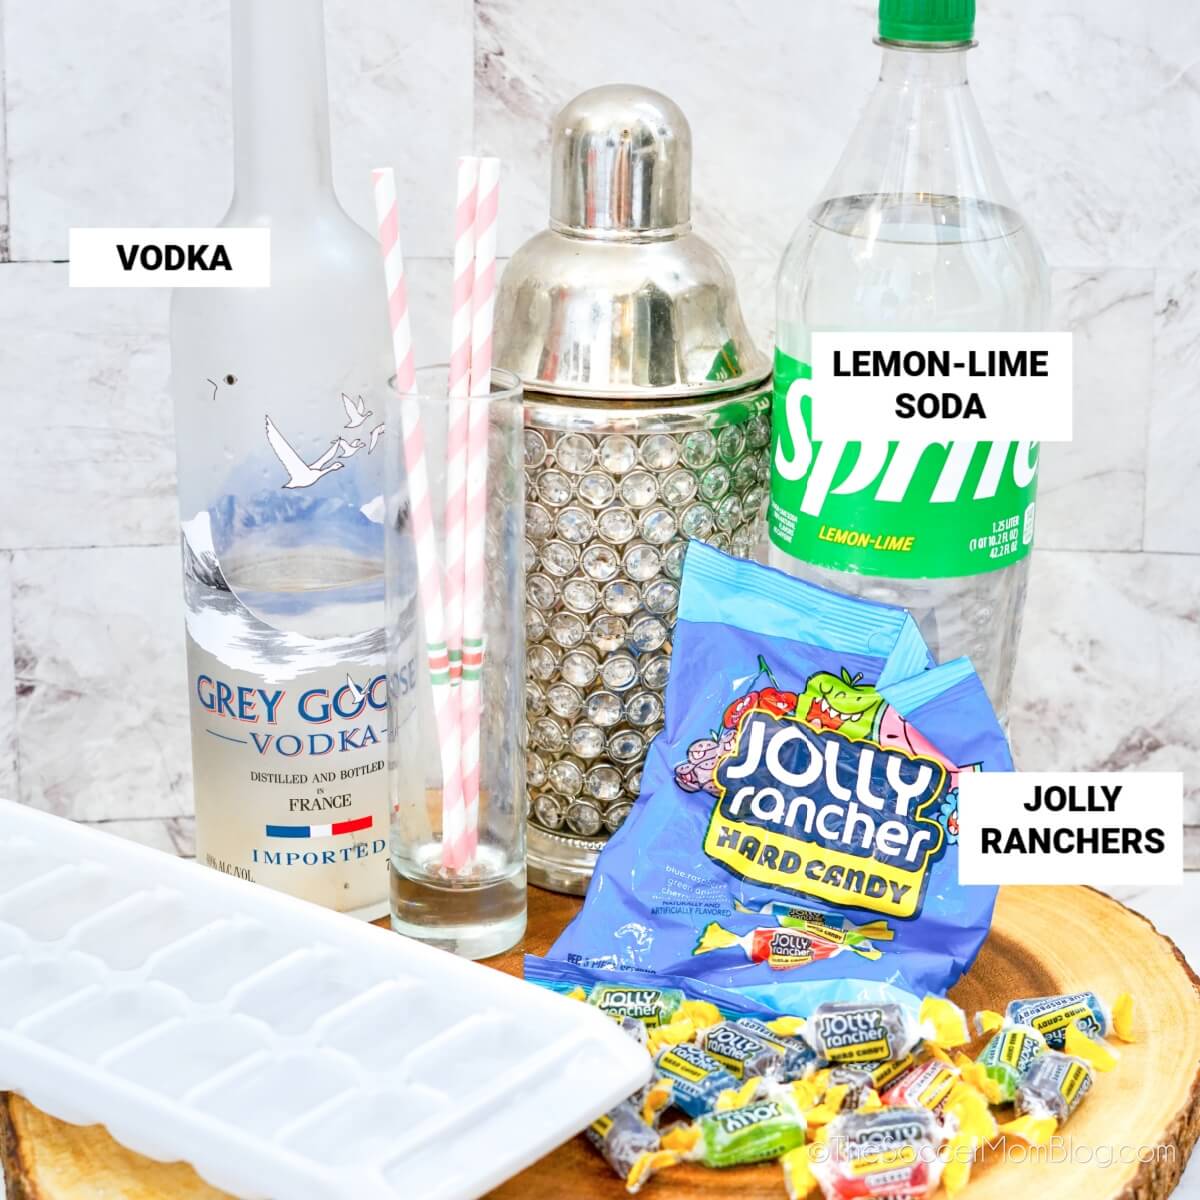 Jolly Rancher cocktail ingredients, with text labels